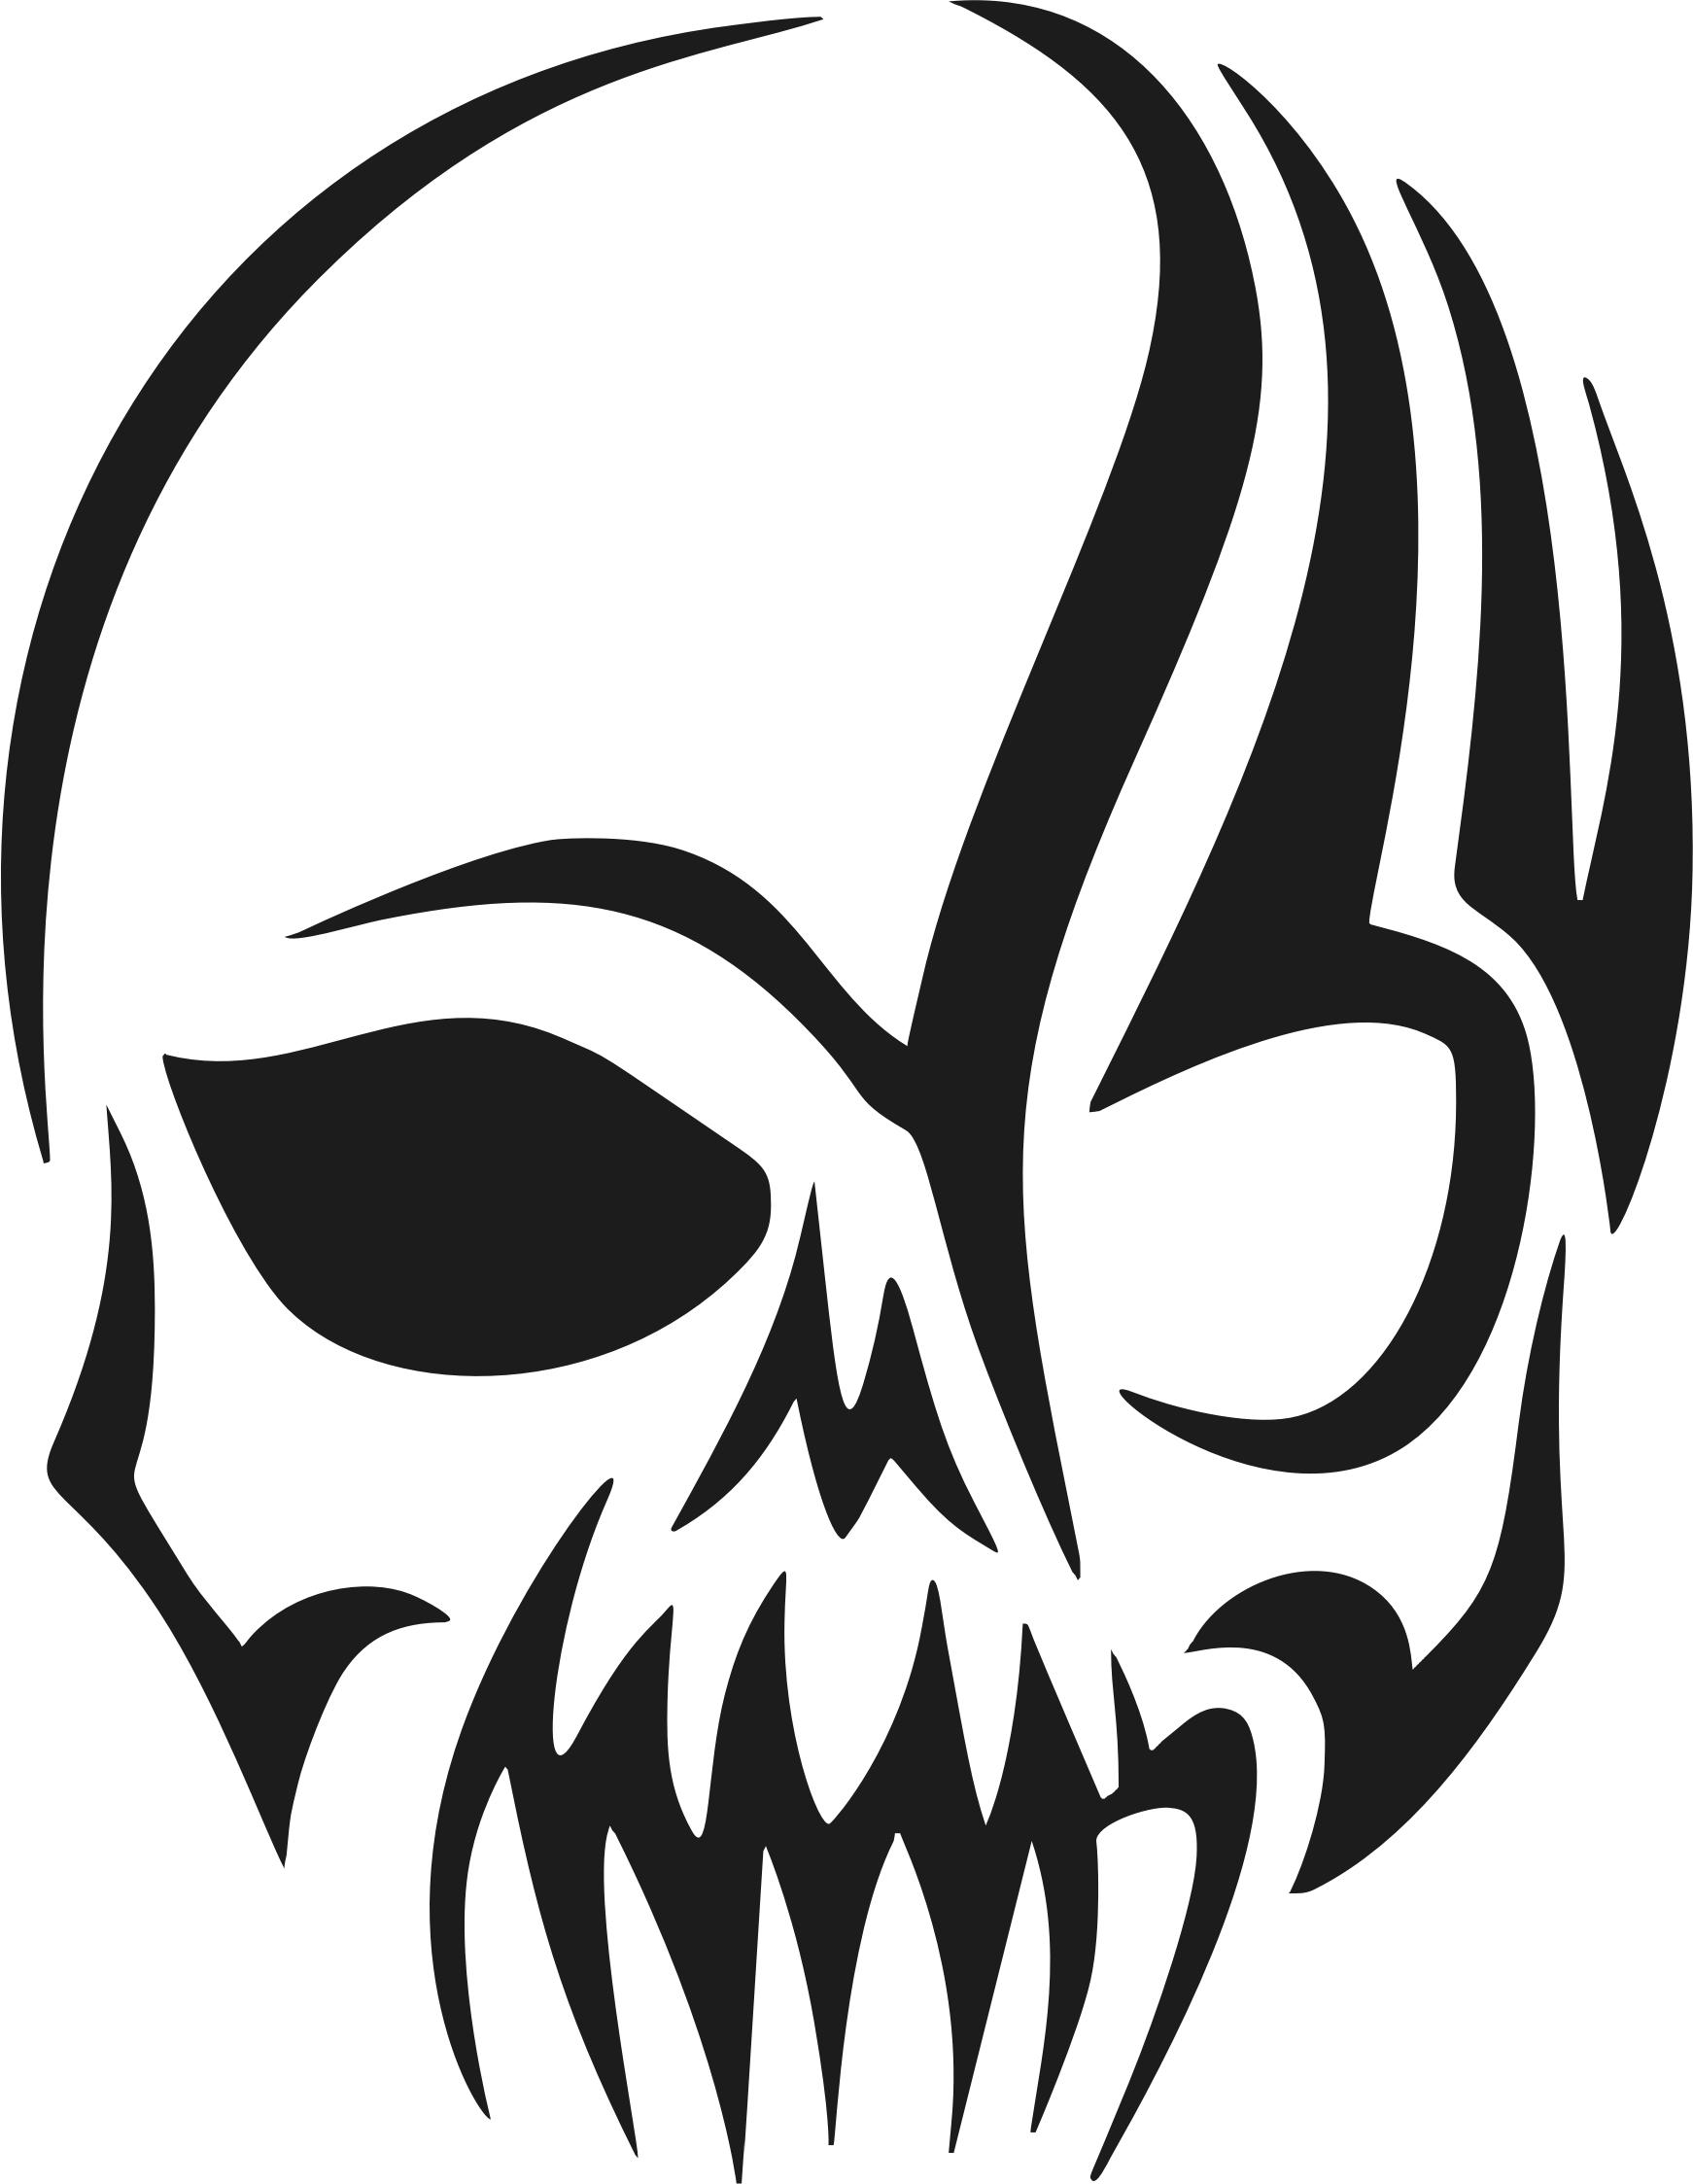 Tribal Skull Tattoo PNG Images HD